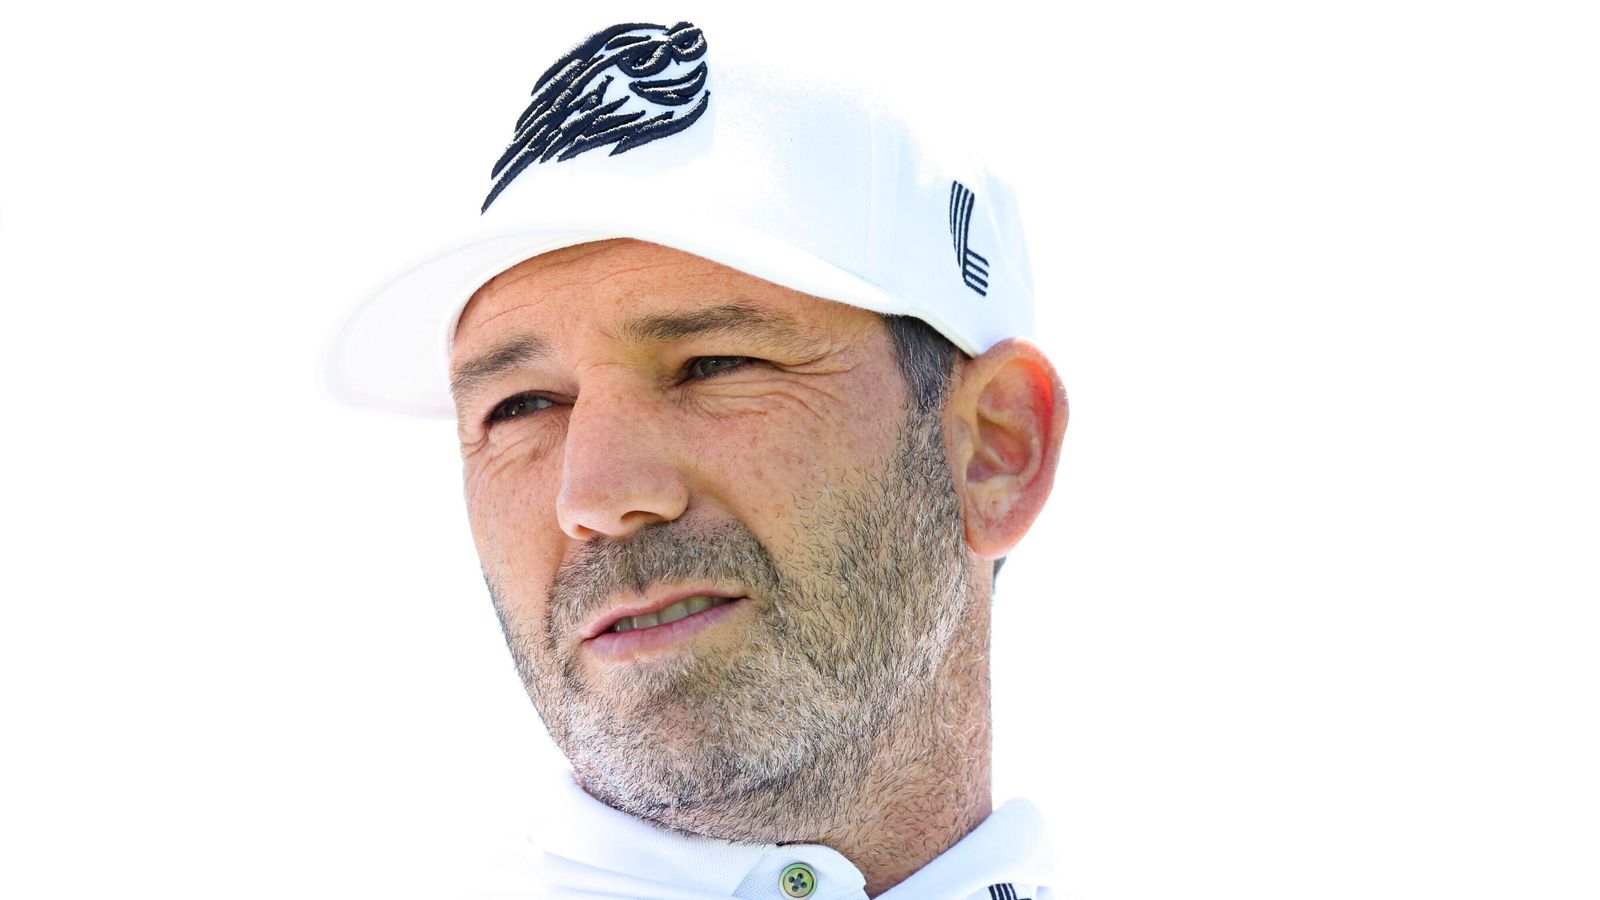 Sergio Garcia says Luke Donald told him he had ‘no chance’ of making Ryder Cup